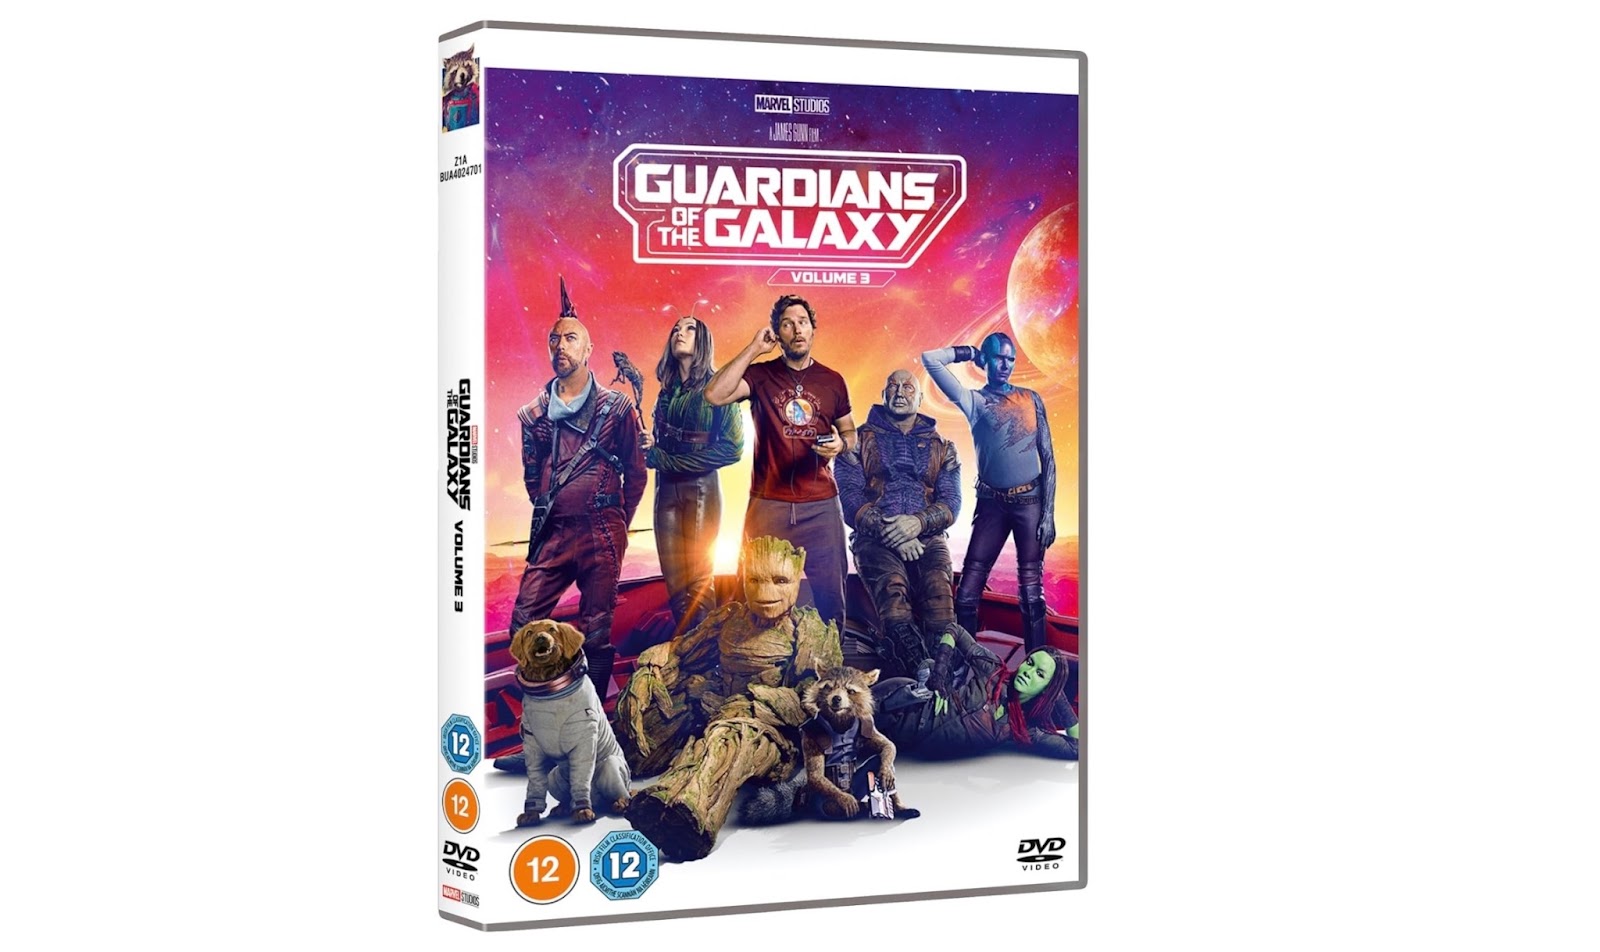 Guardians of the Galaxy Vol. 3: DVD Release Date